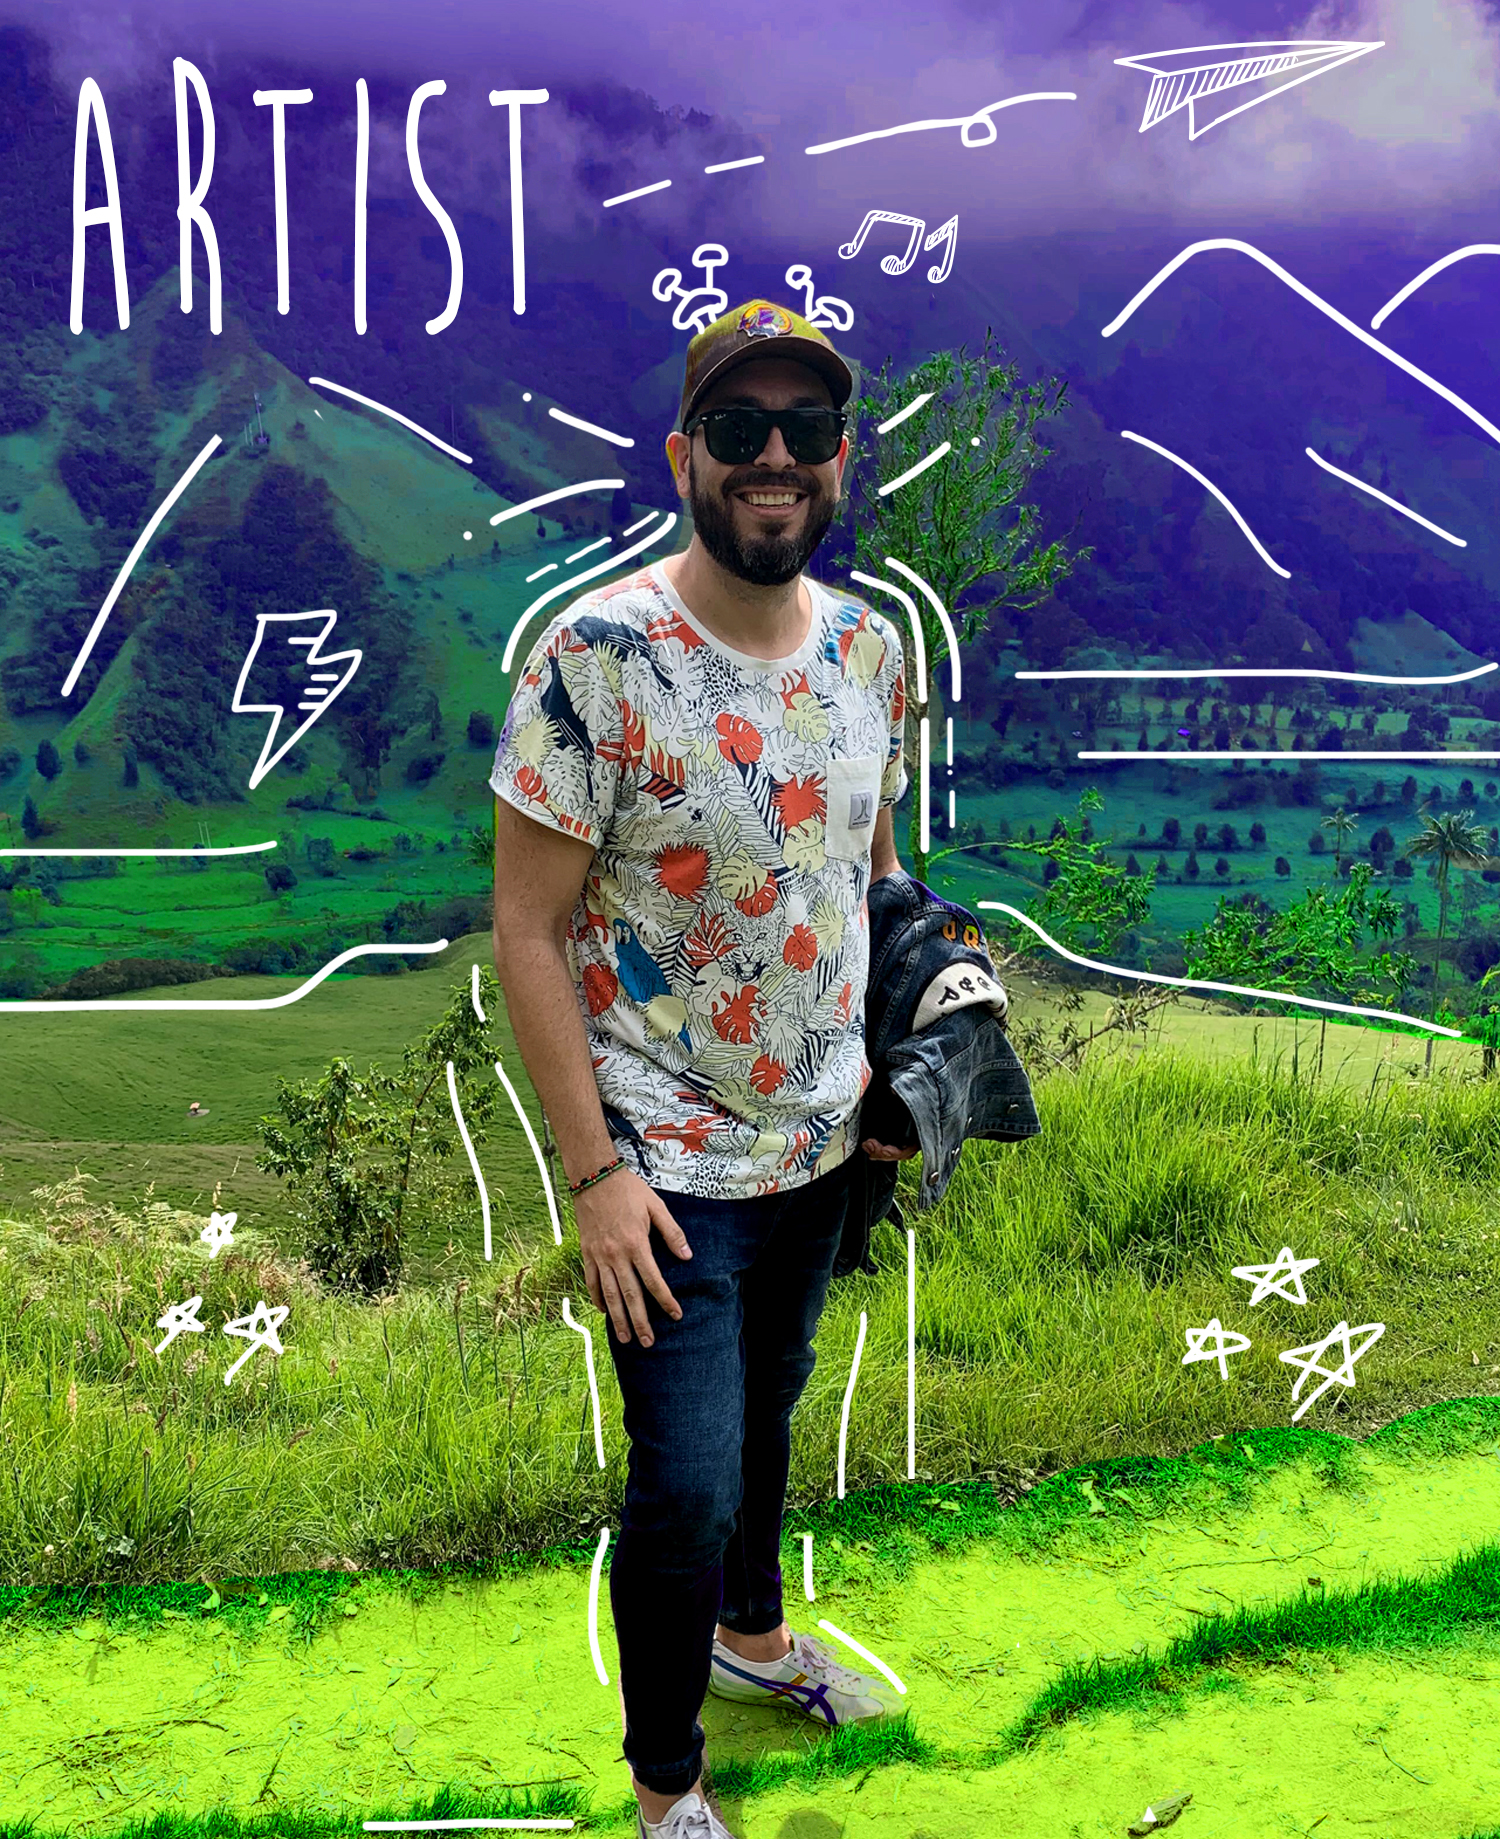 Dani standing in field with a hat and sunglasses on. The word "ARTIST" is written overtop.